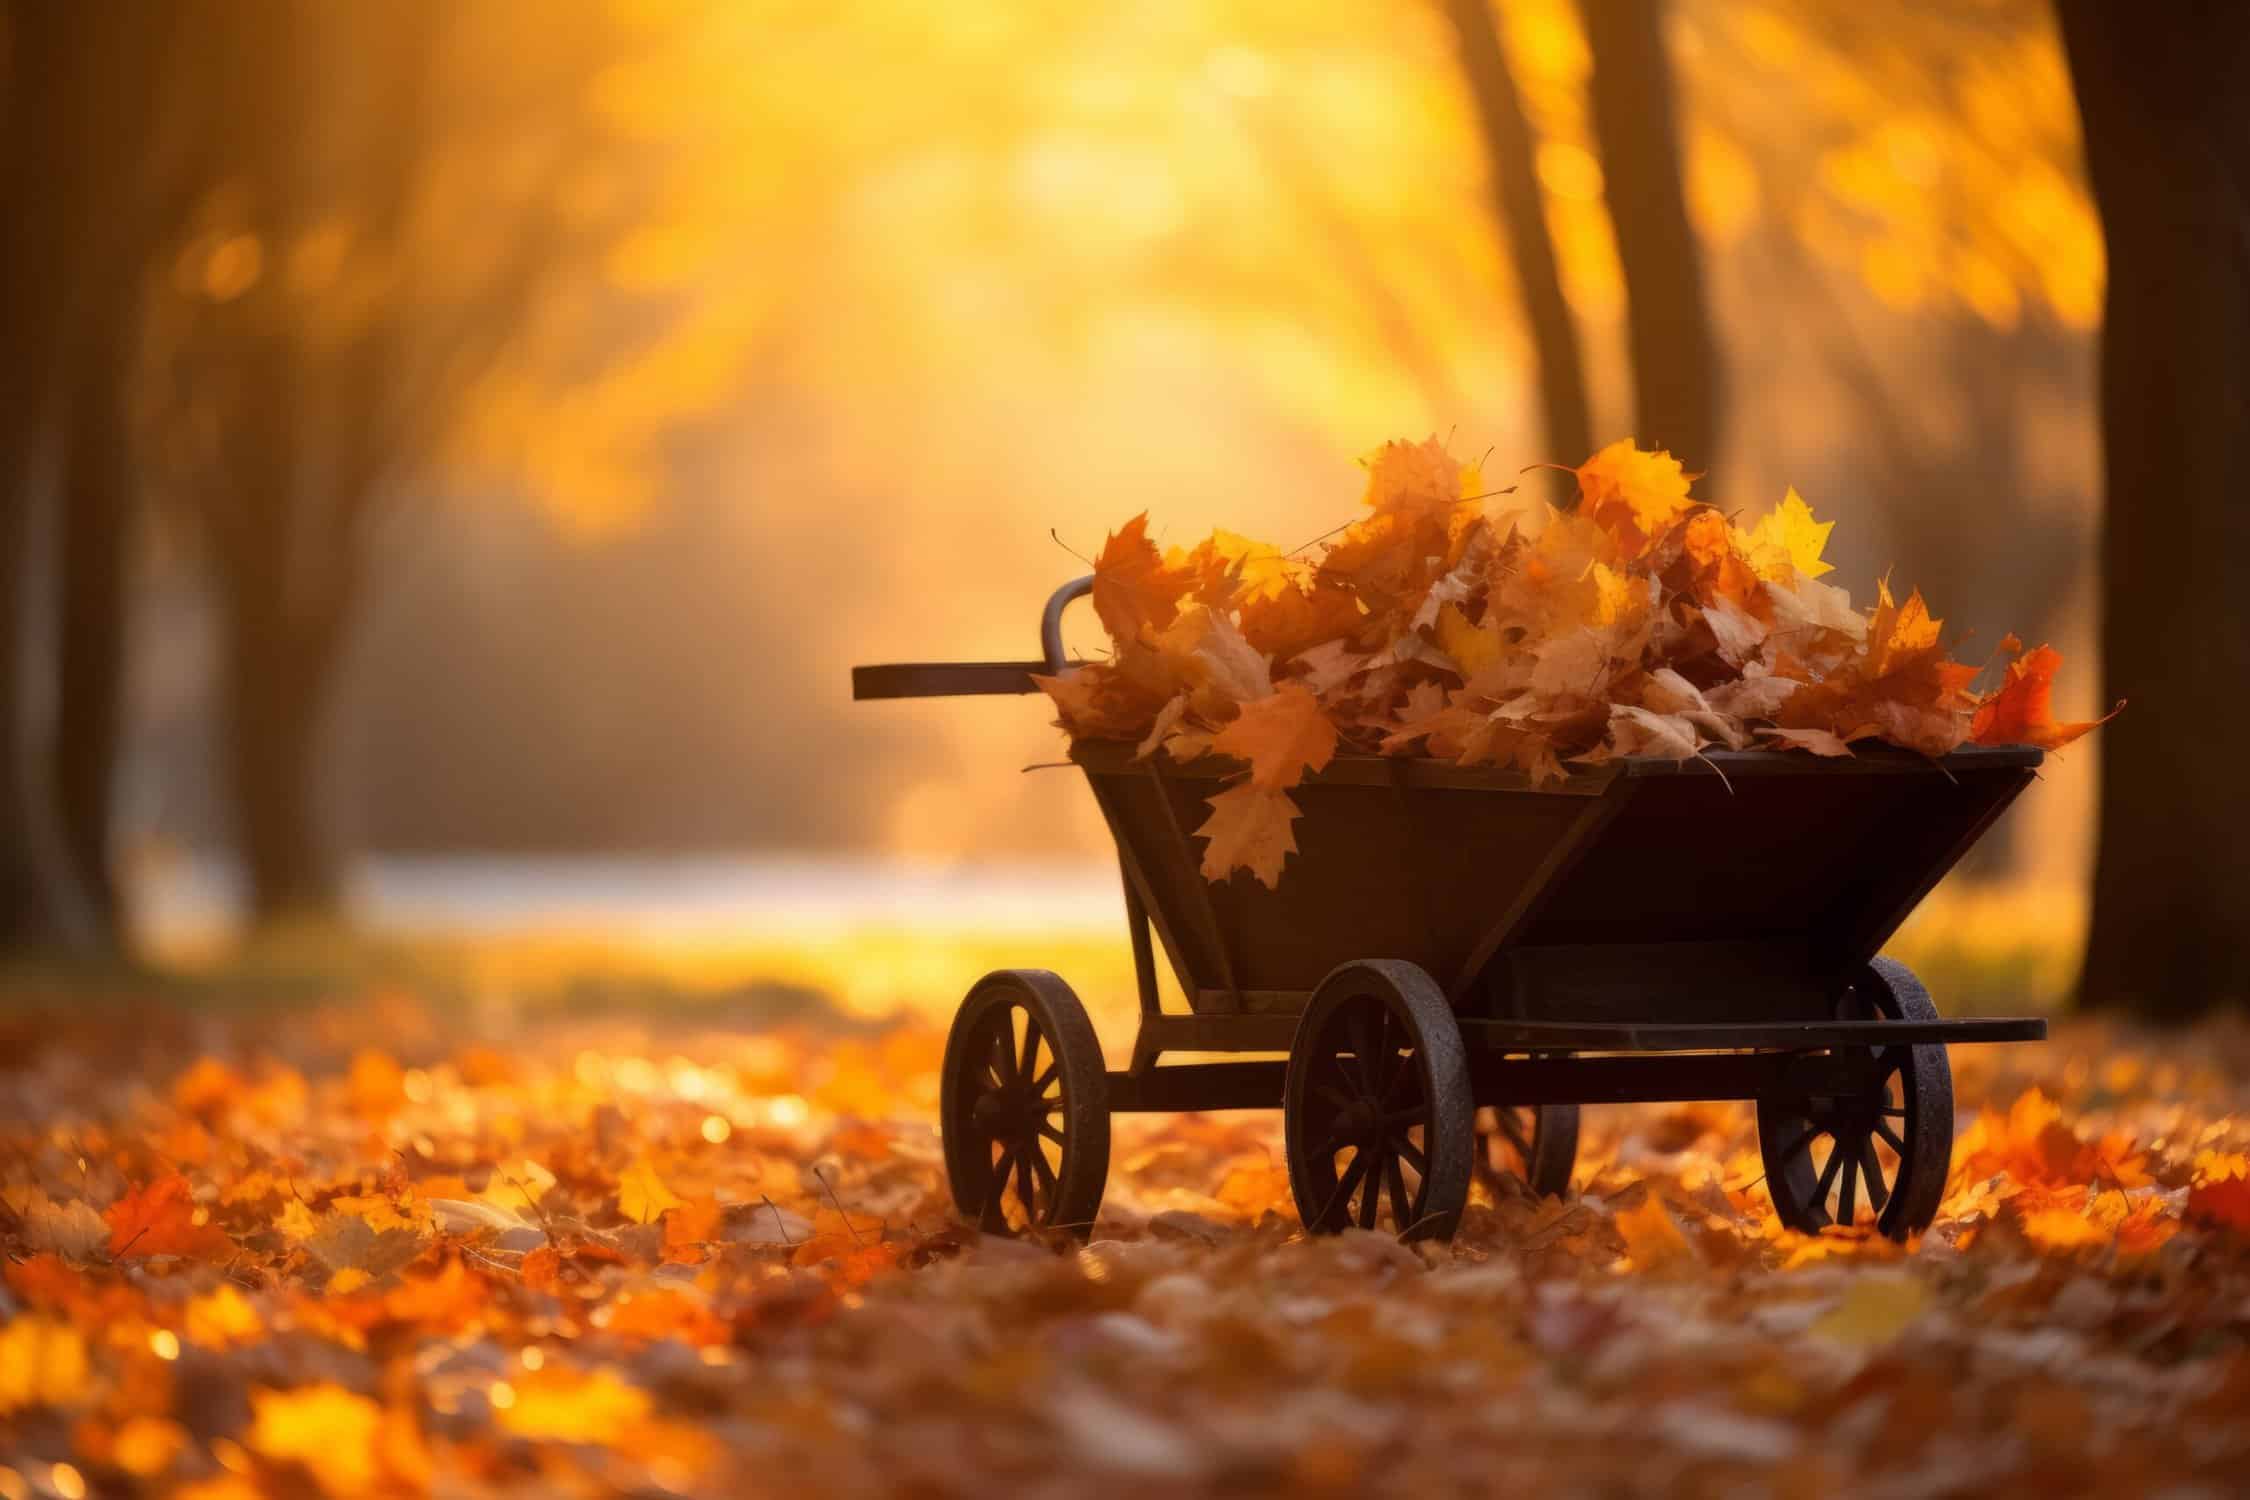 Wheelbarrow  filled with leaves after raking leaves